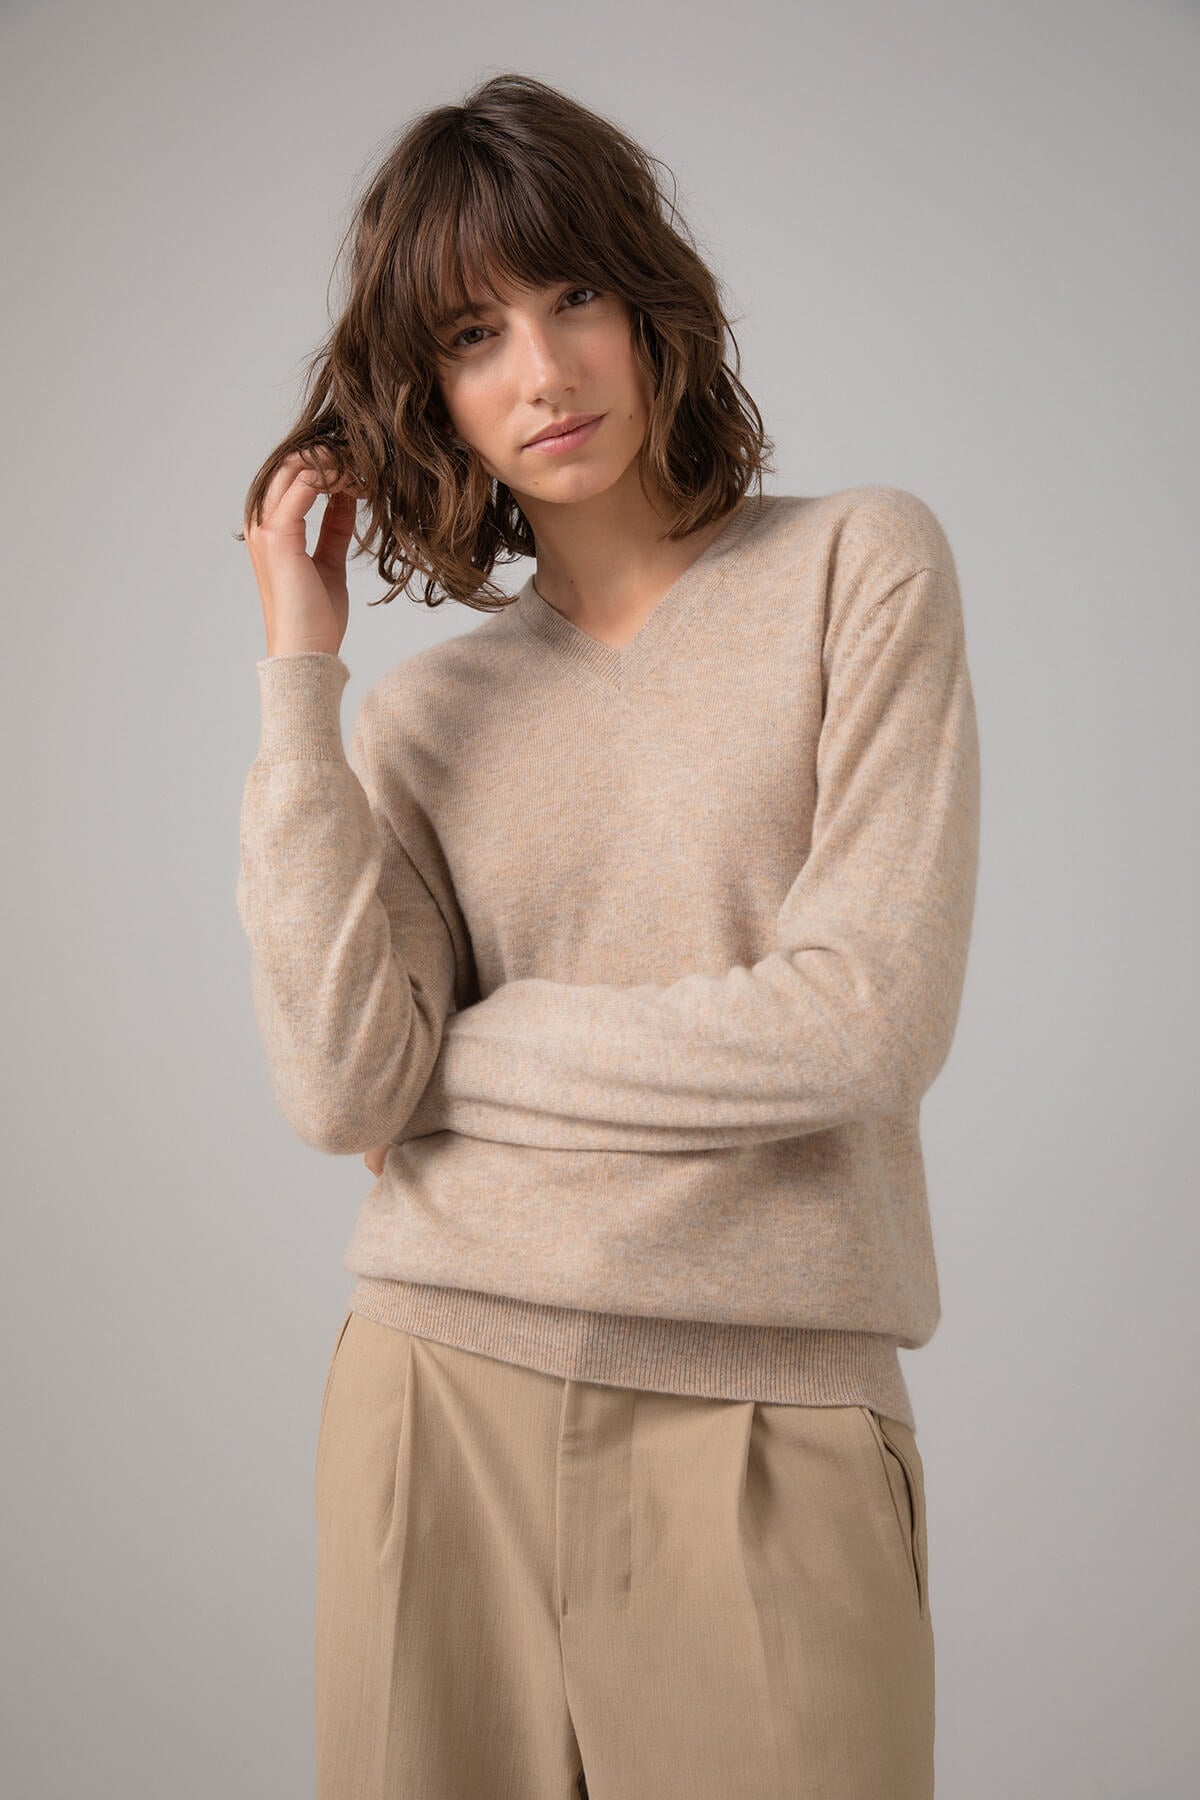 Model wearing Johnstons of Elgin Women's V Neck Cashmere Jumper in Oatmeal worn with Camel Trousers on a grey background KAI05140HB0210